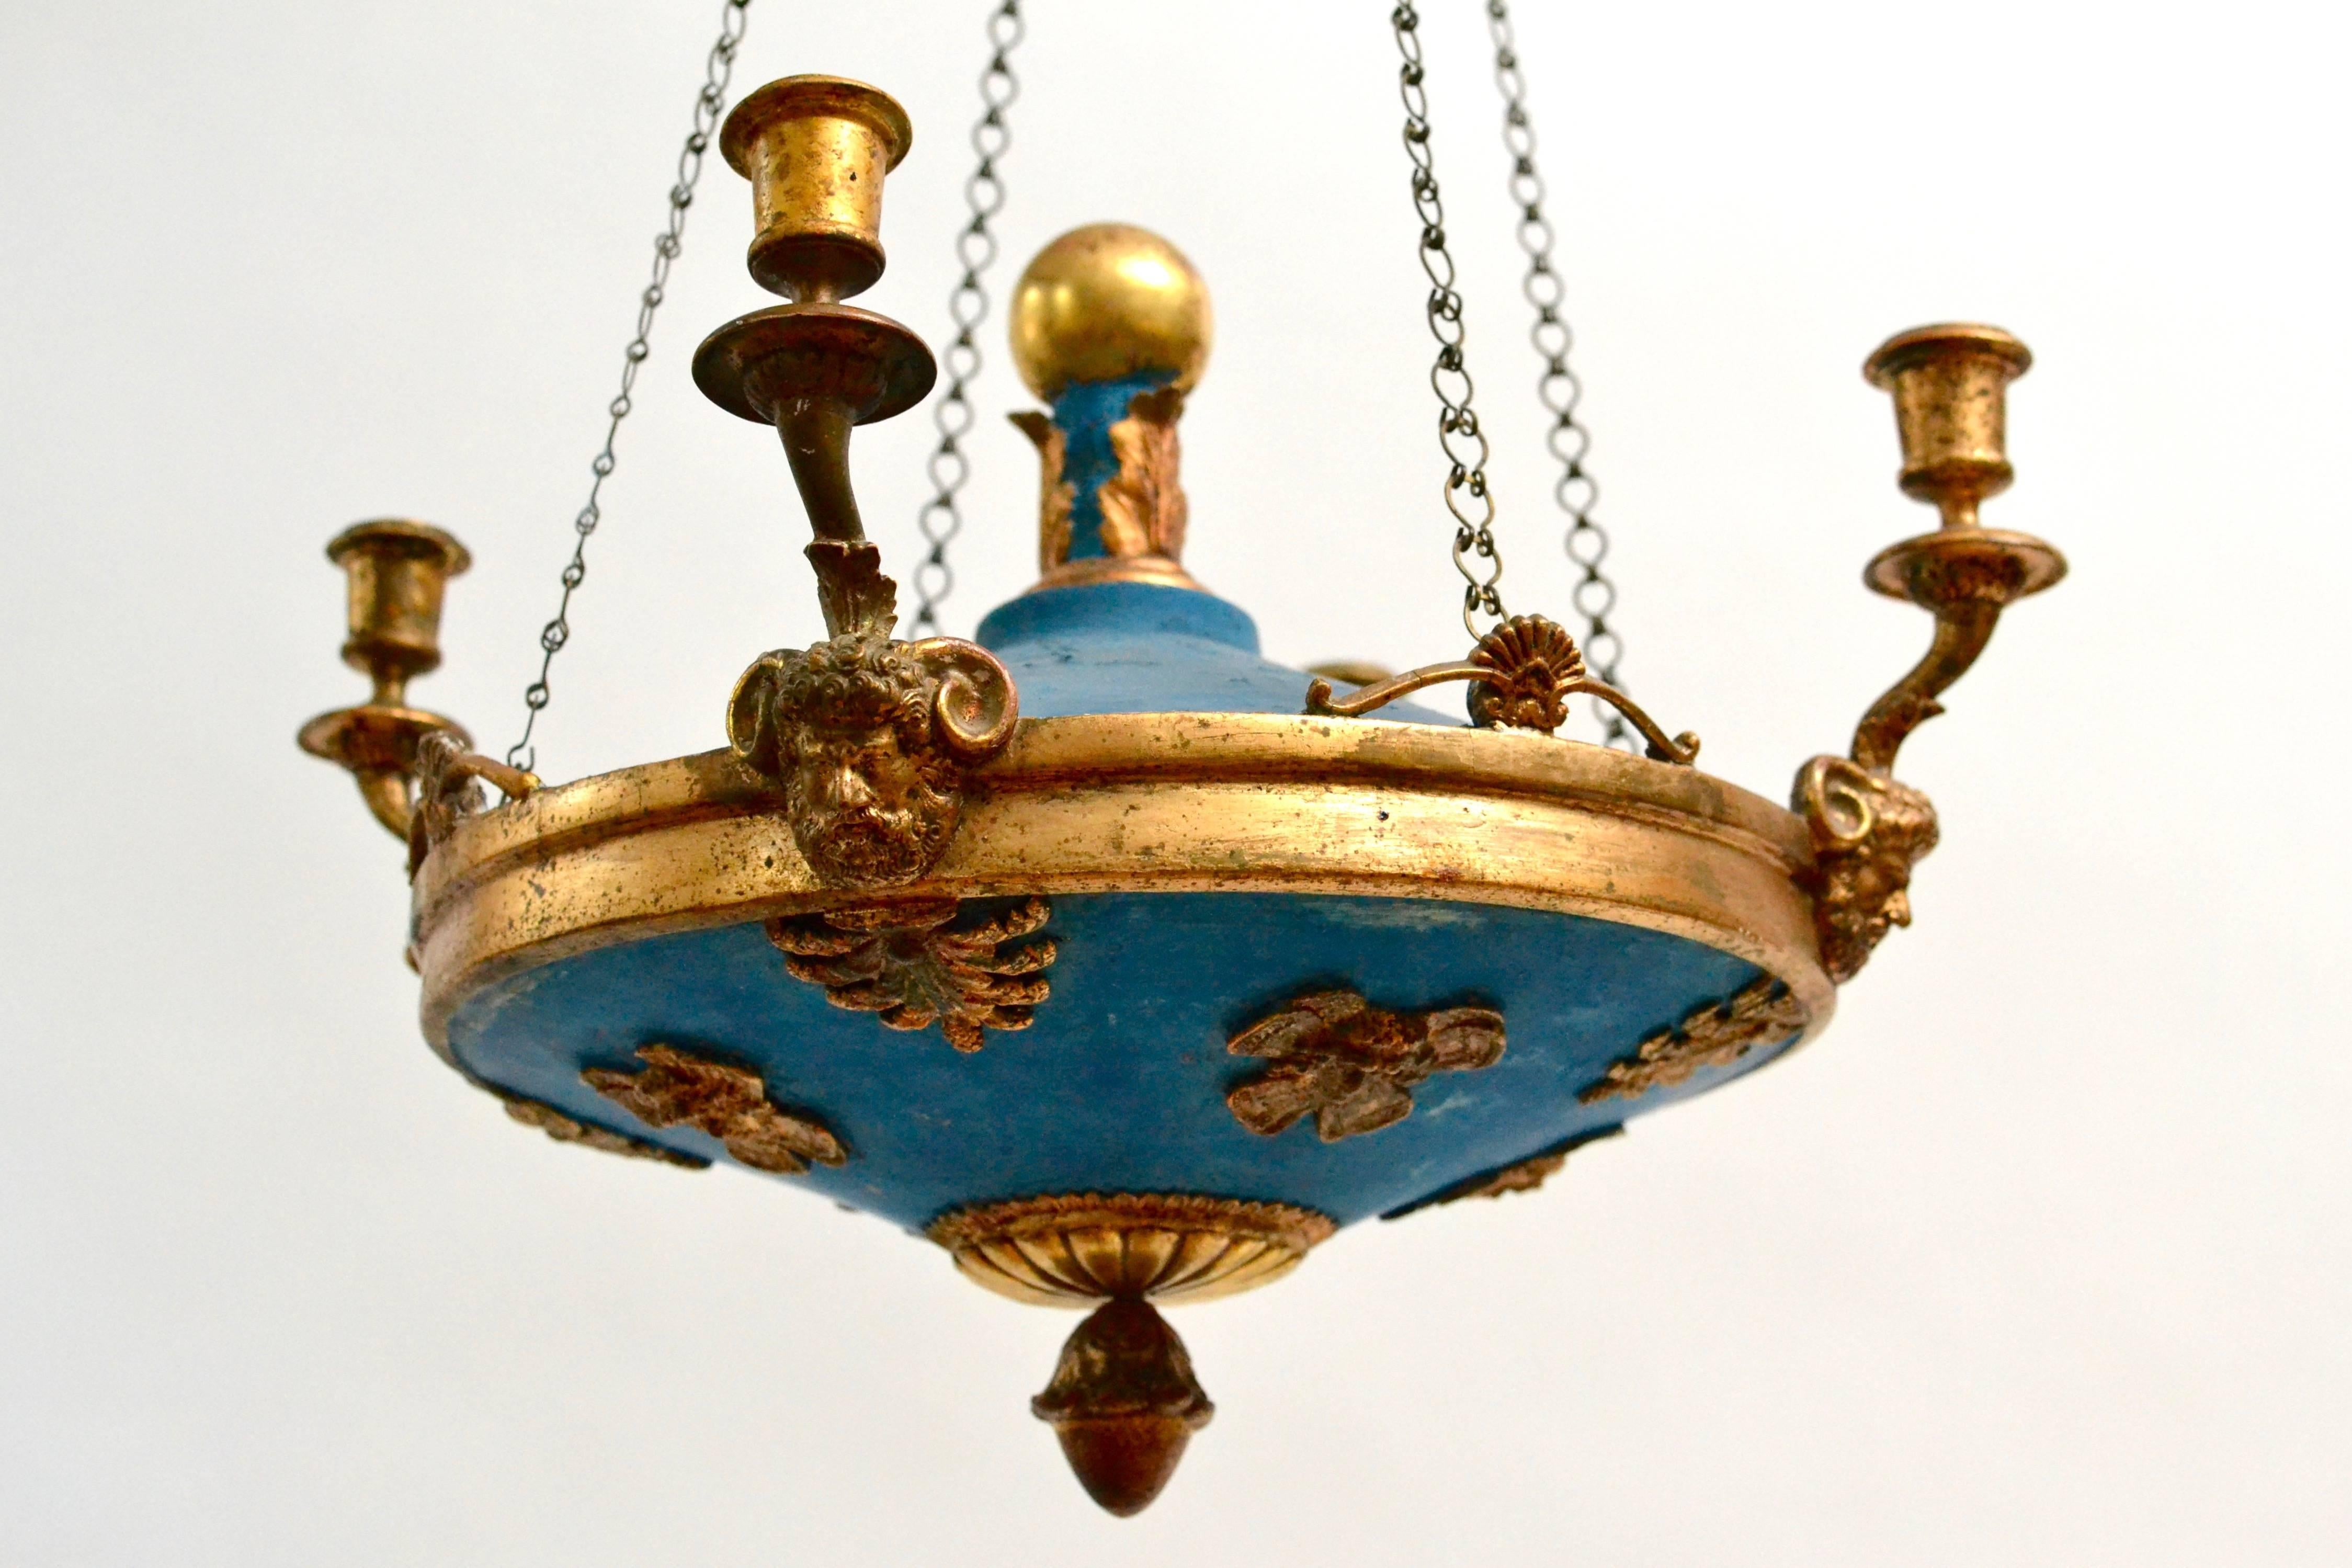 A painted and giltwood Empire chandelier. Probably Baltic, circa 1820-1830.